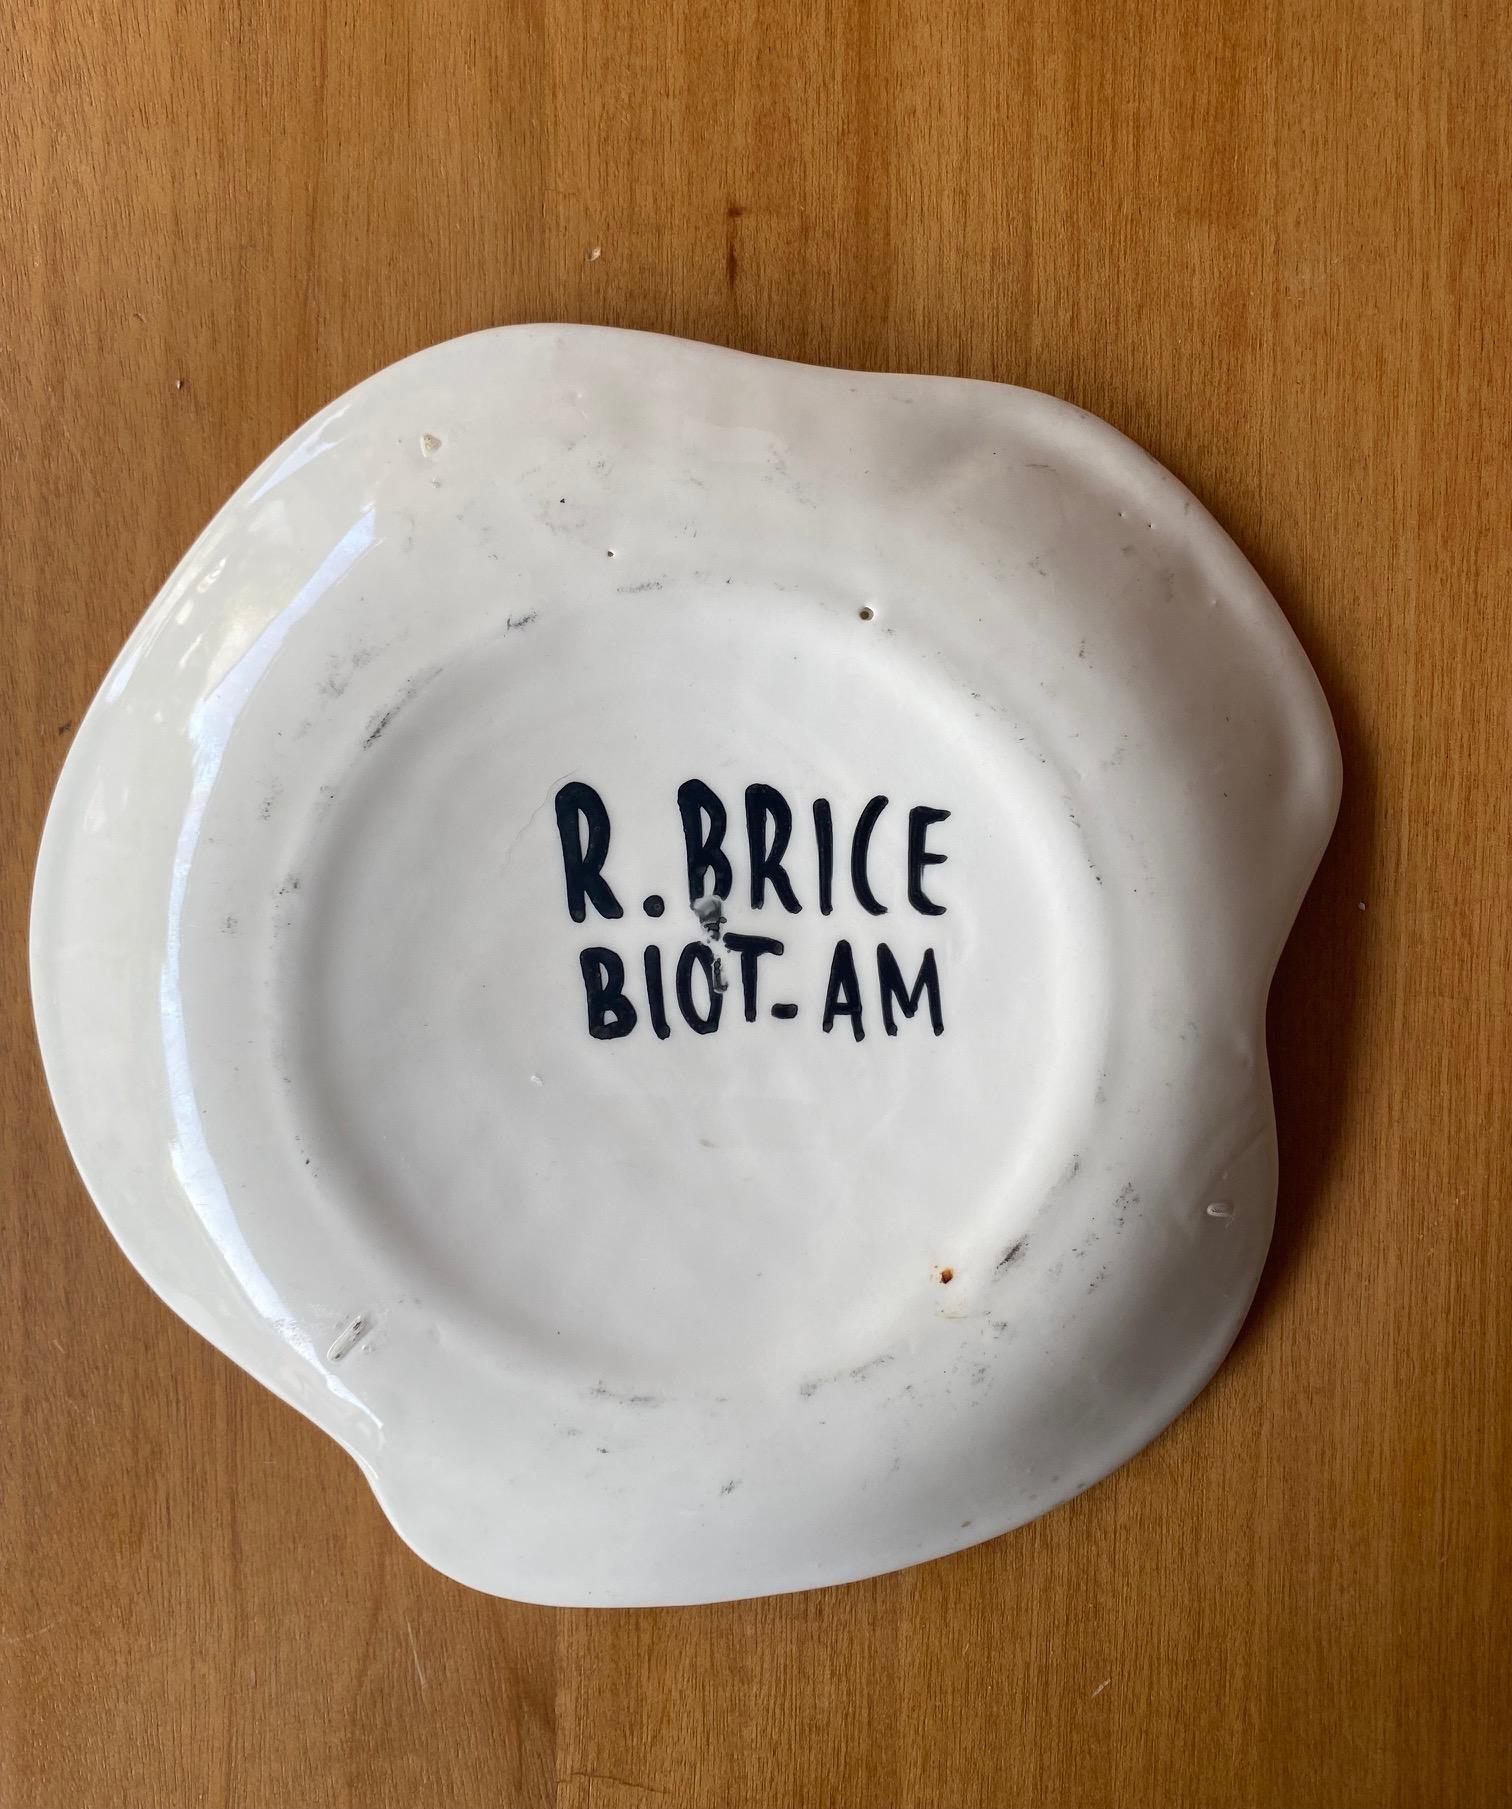 Set of Four Ceramic Plates by Roland Brice, Biot, France, 1950-1960 For Sale 1